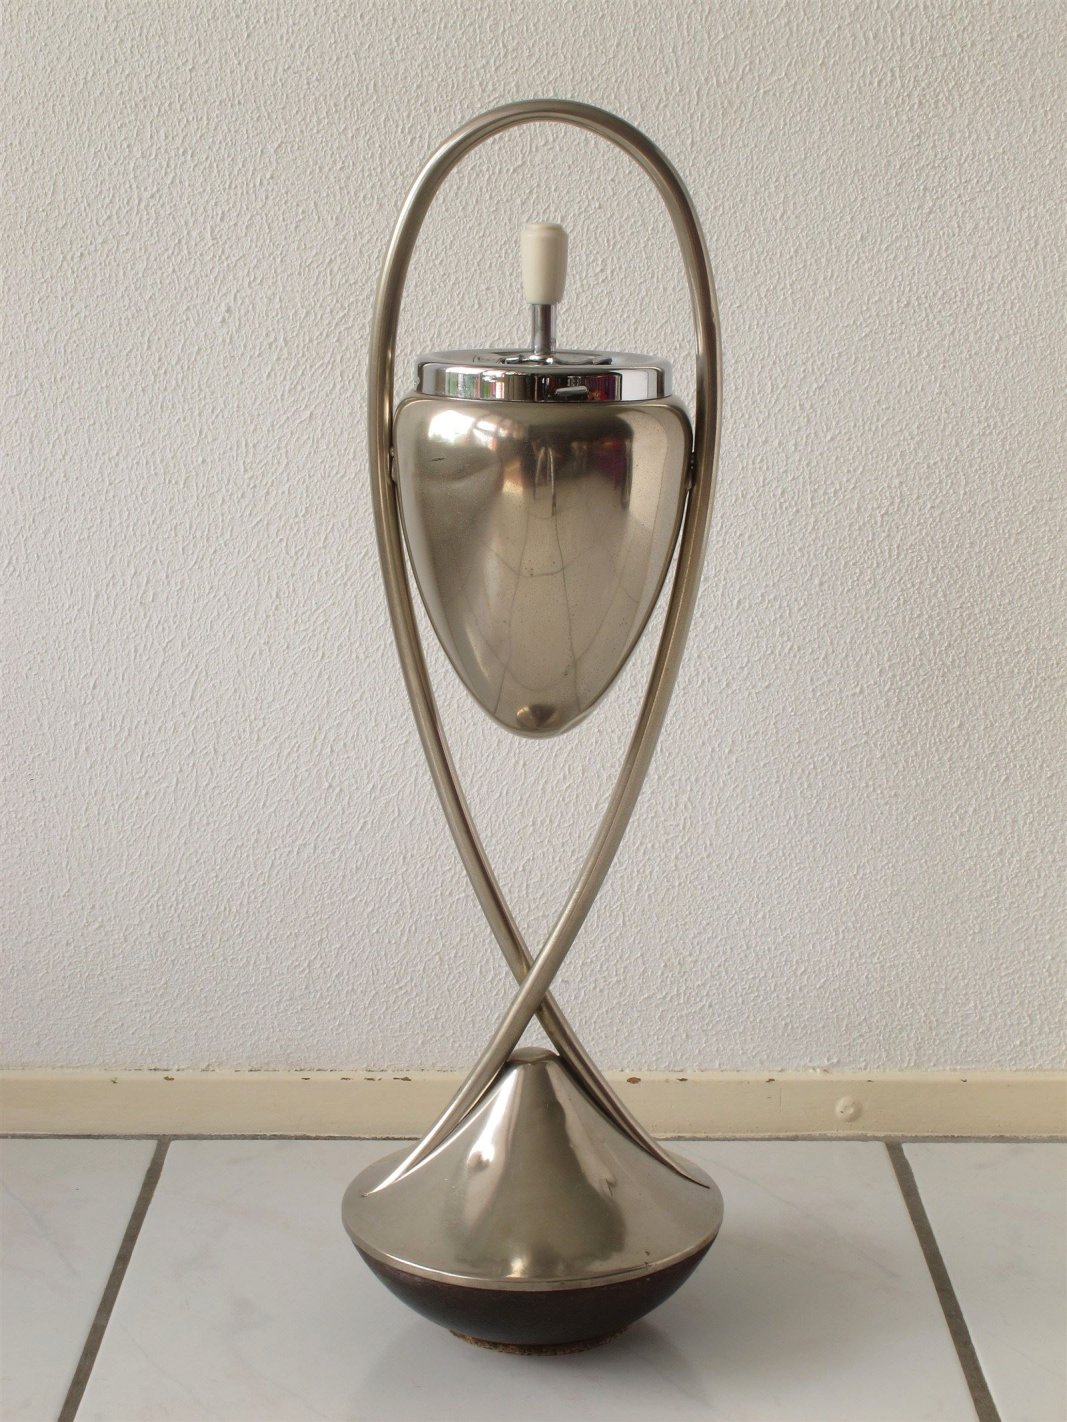 Vintage ashtray stand